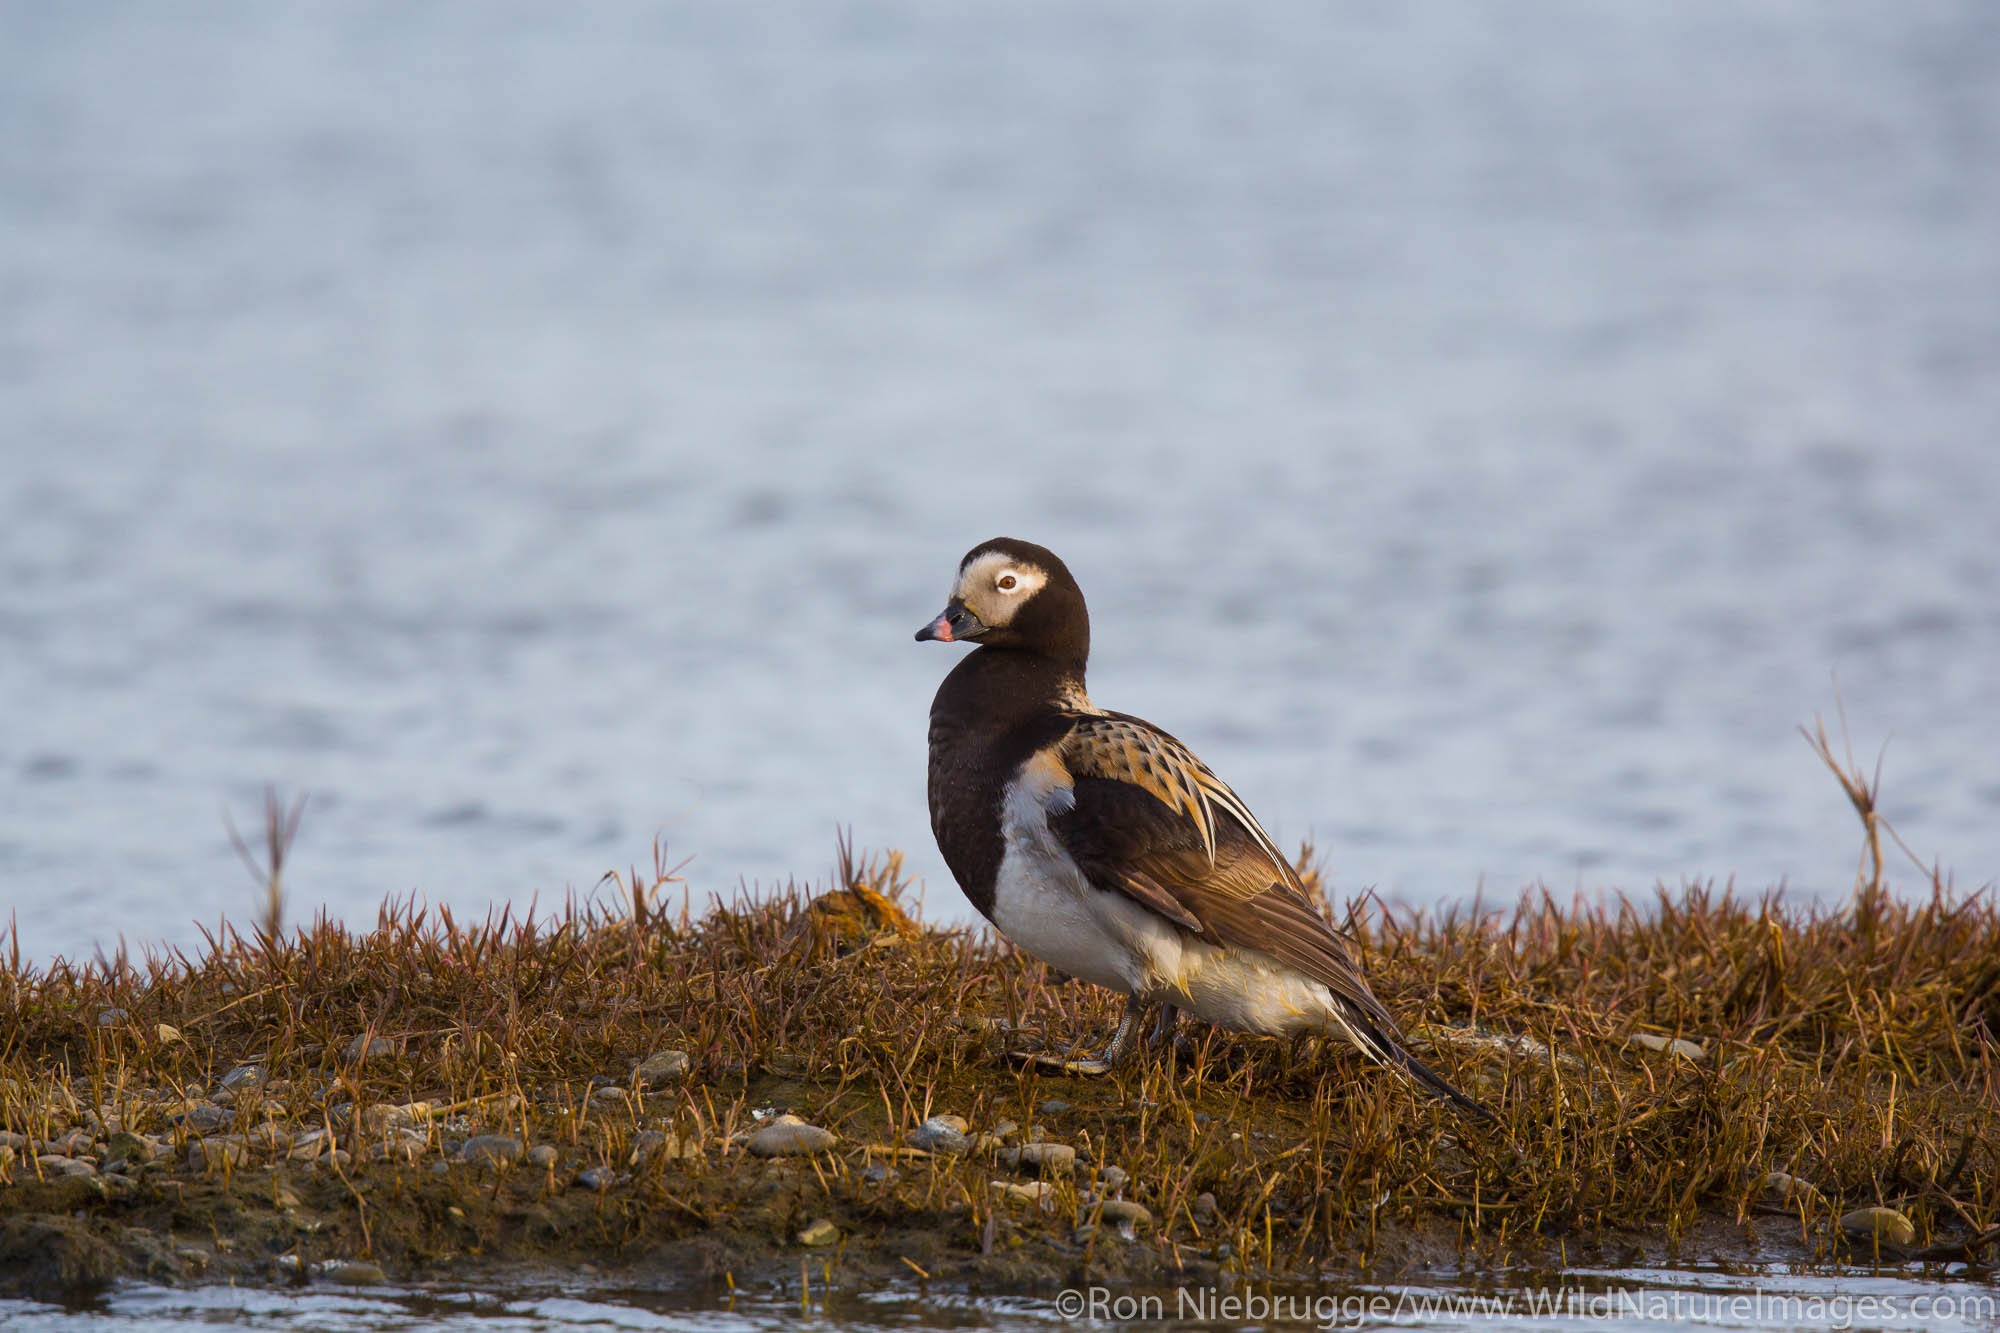 Long-tailed duck (Clangula hyemalis), once known as oldsquaw, Arctic Alaska.